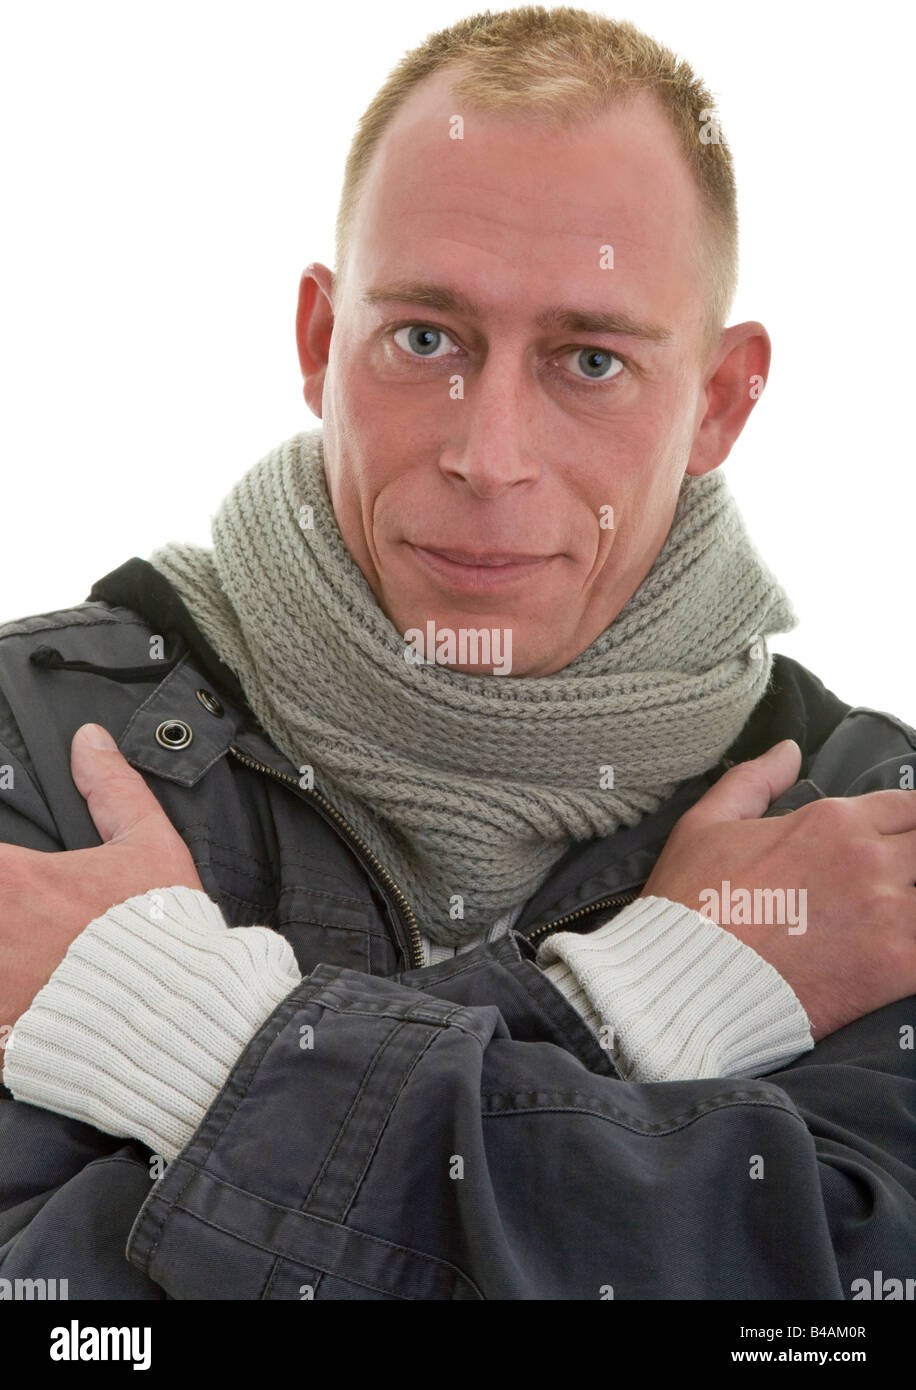 man with scarf Stock Photo